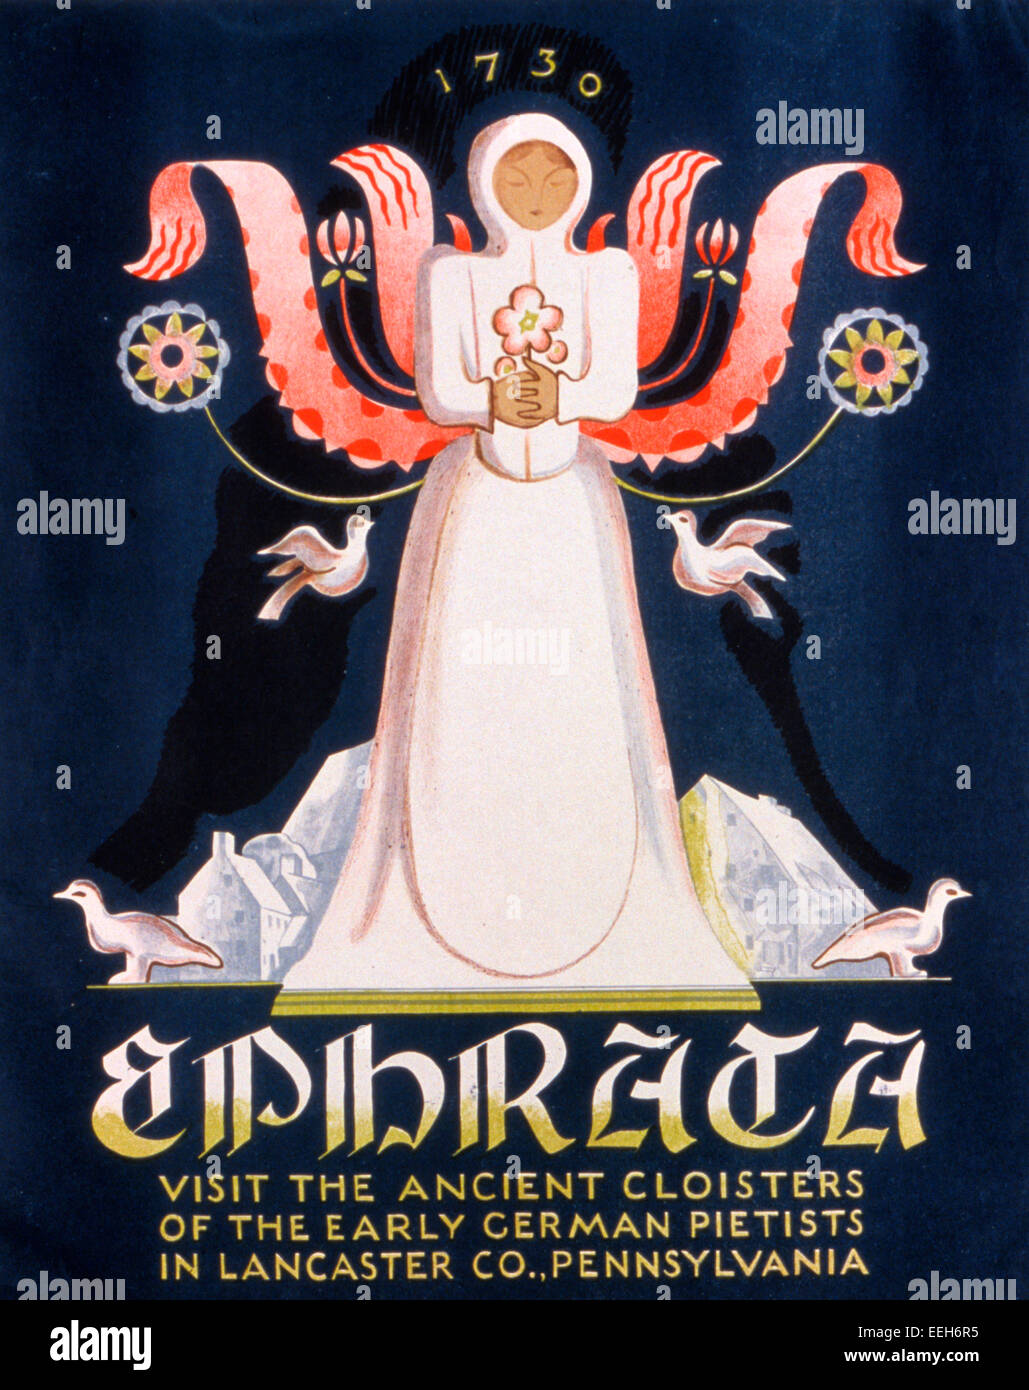 Ephrata Visit the ancient cloisters of the early German pietists in Lancaster County., Pennsylvania - Poster promoting the Ephrata Cloister, Lancaster County., Pennsylvania., showing a woman as an angel, circa 1938 Stock Photo